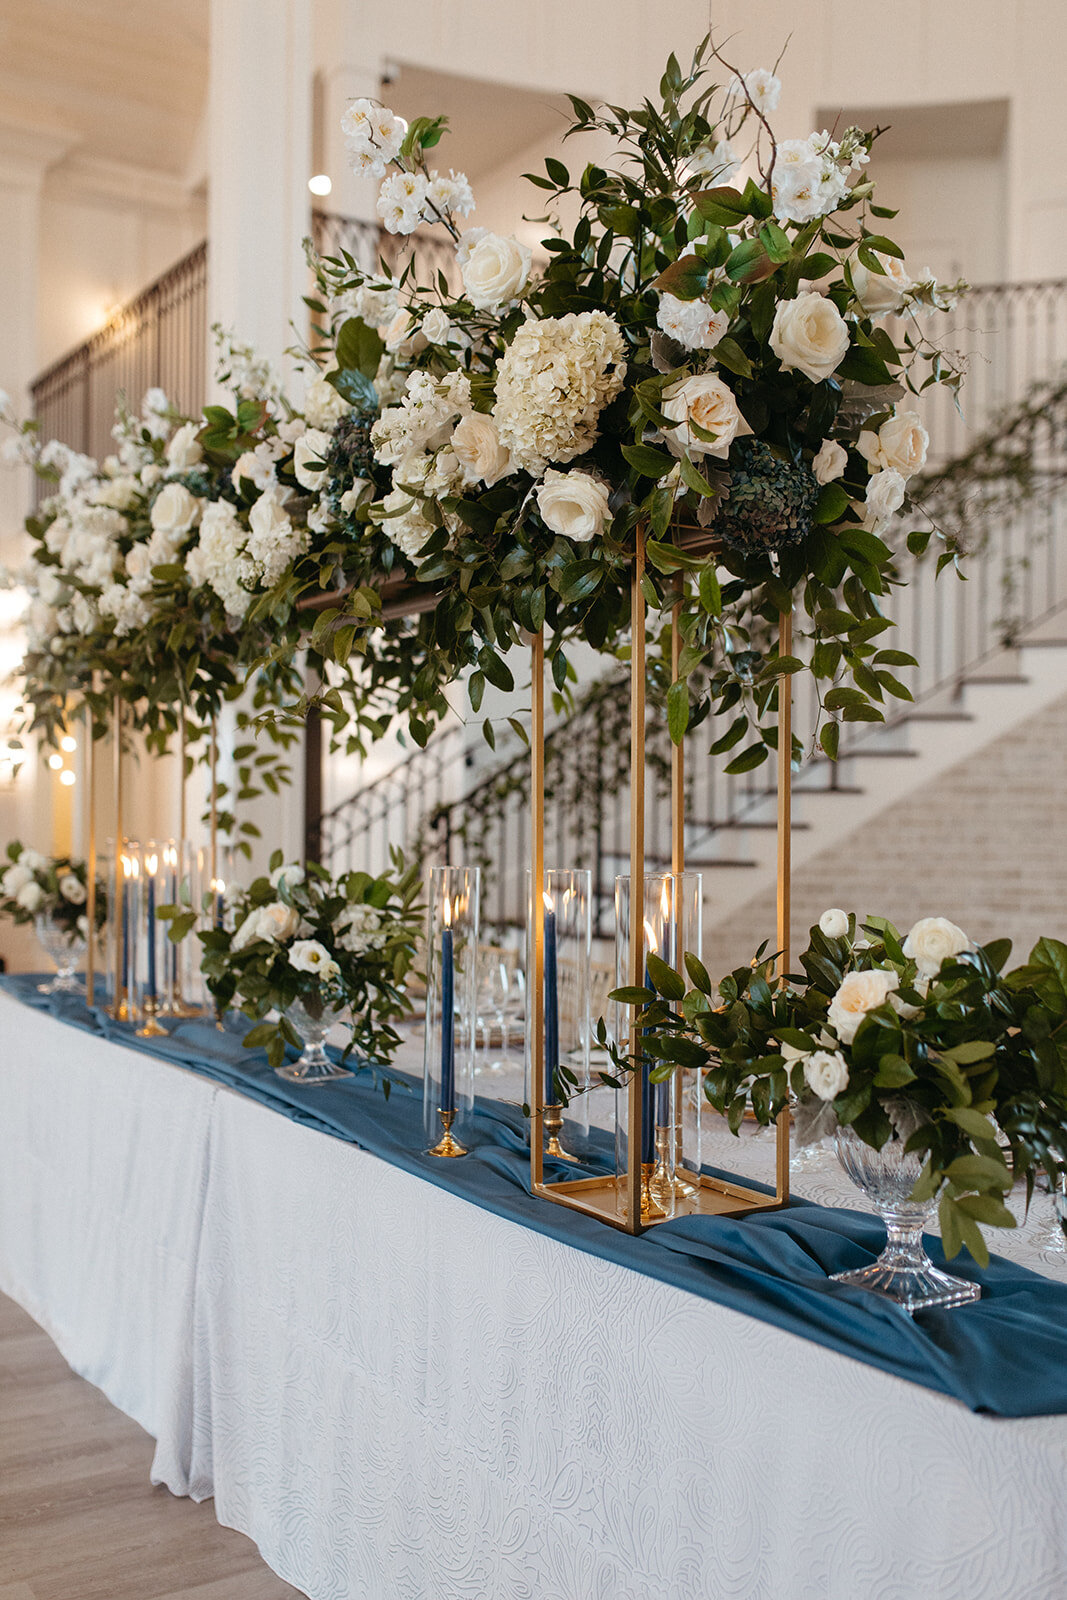 White floral arrangements in gold lanterns above a long rectangular table with blue and white linen.